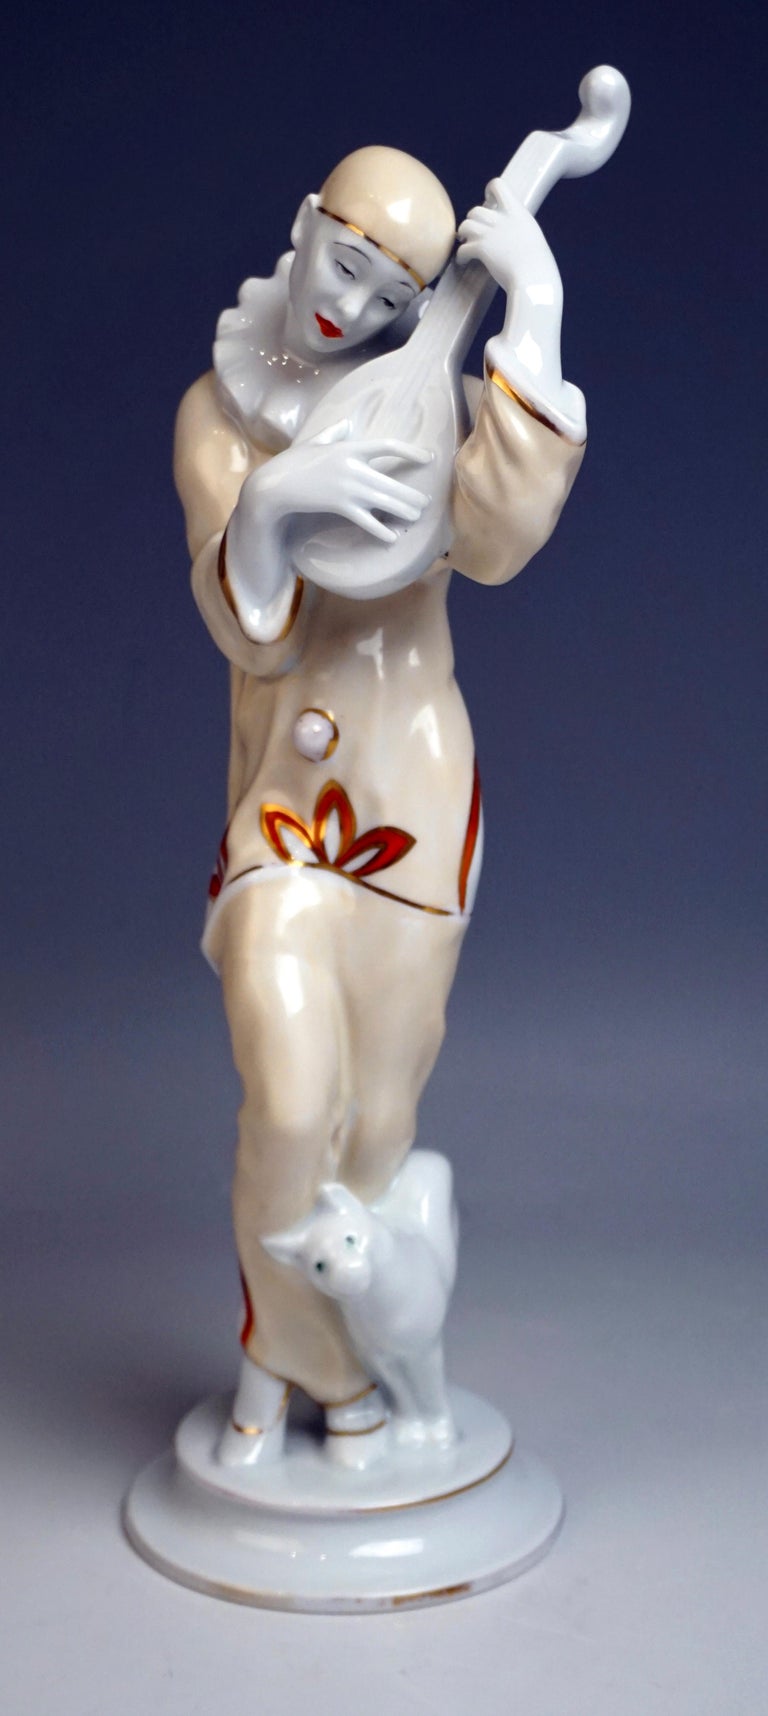 Rosenthal Art Déco Figurine Pierrot 'Ash Wednesday' Max Valentin Germany, 1922 For Sale 1